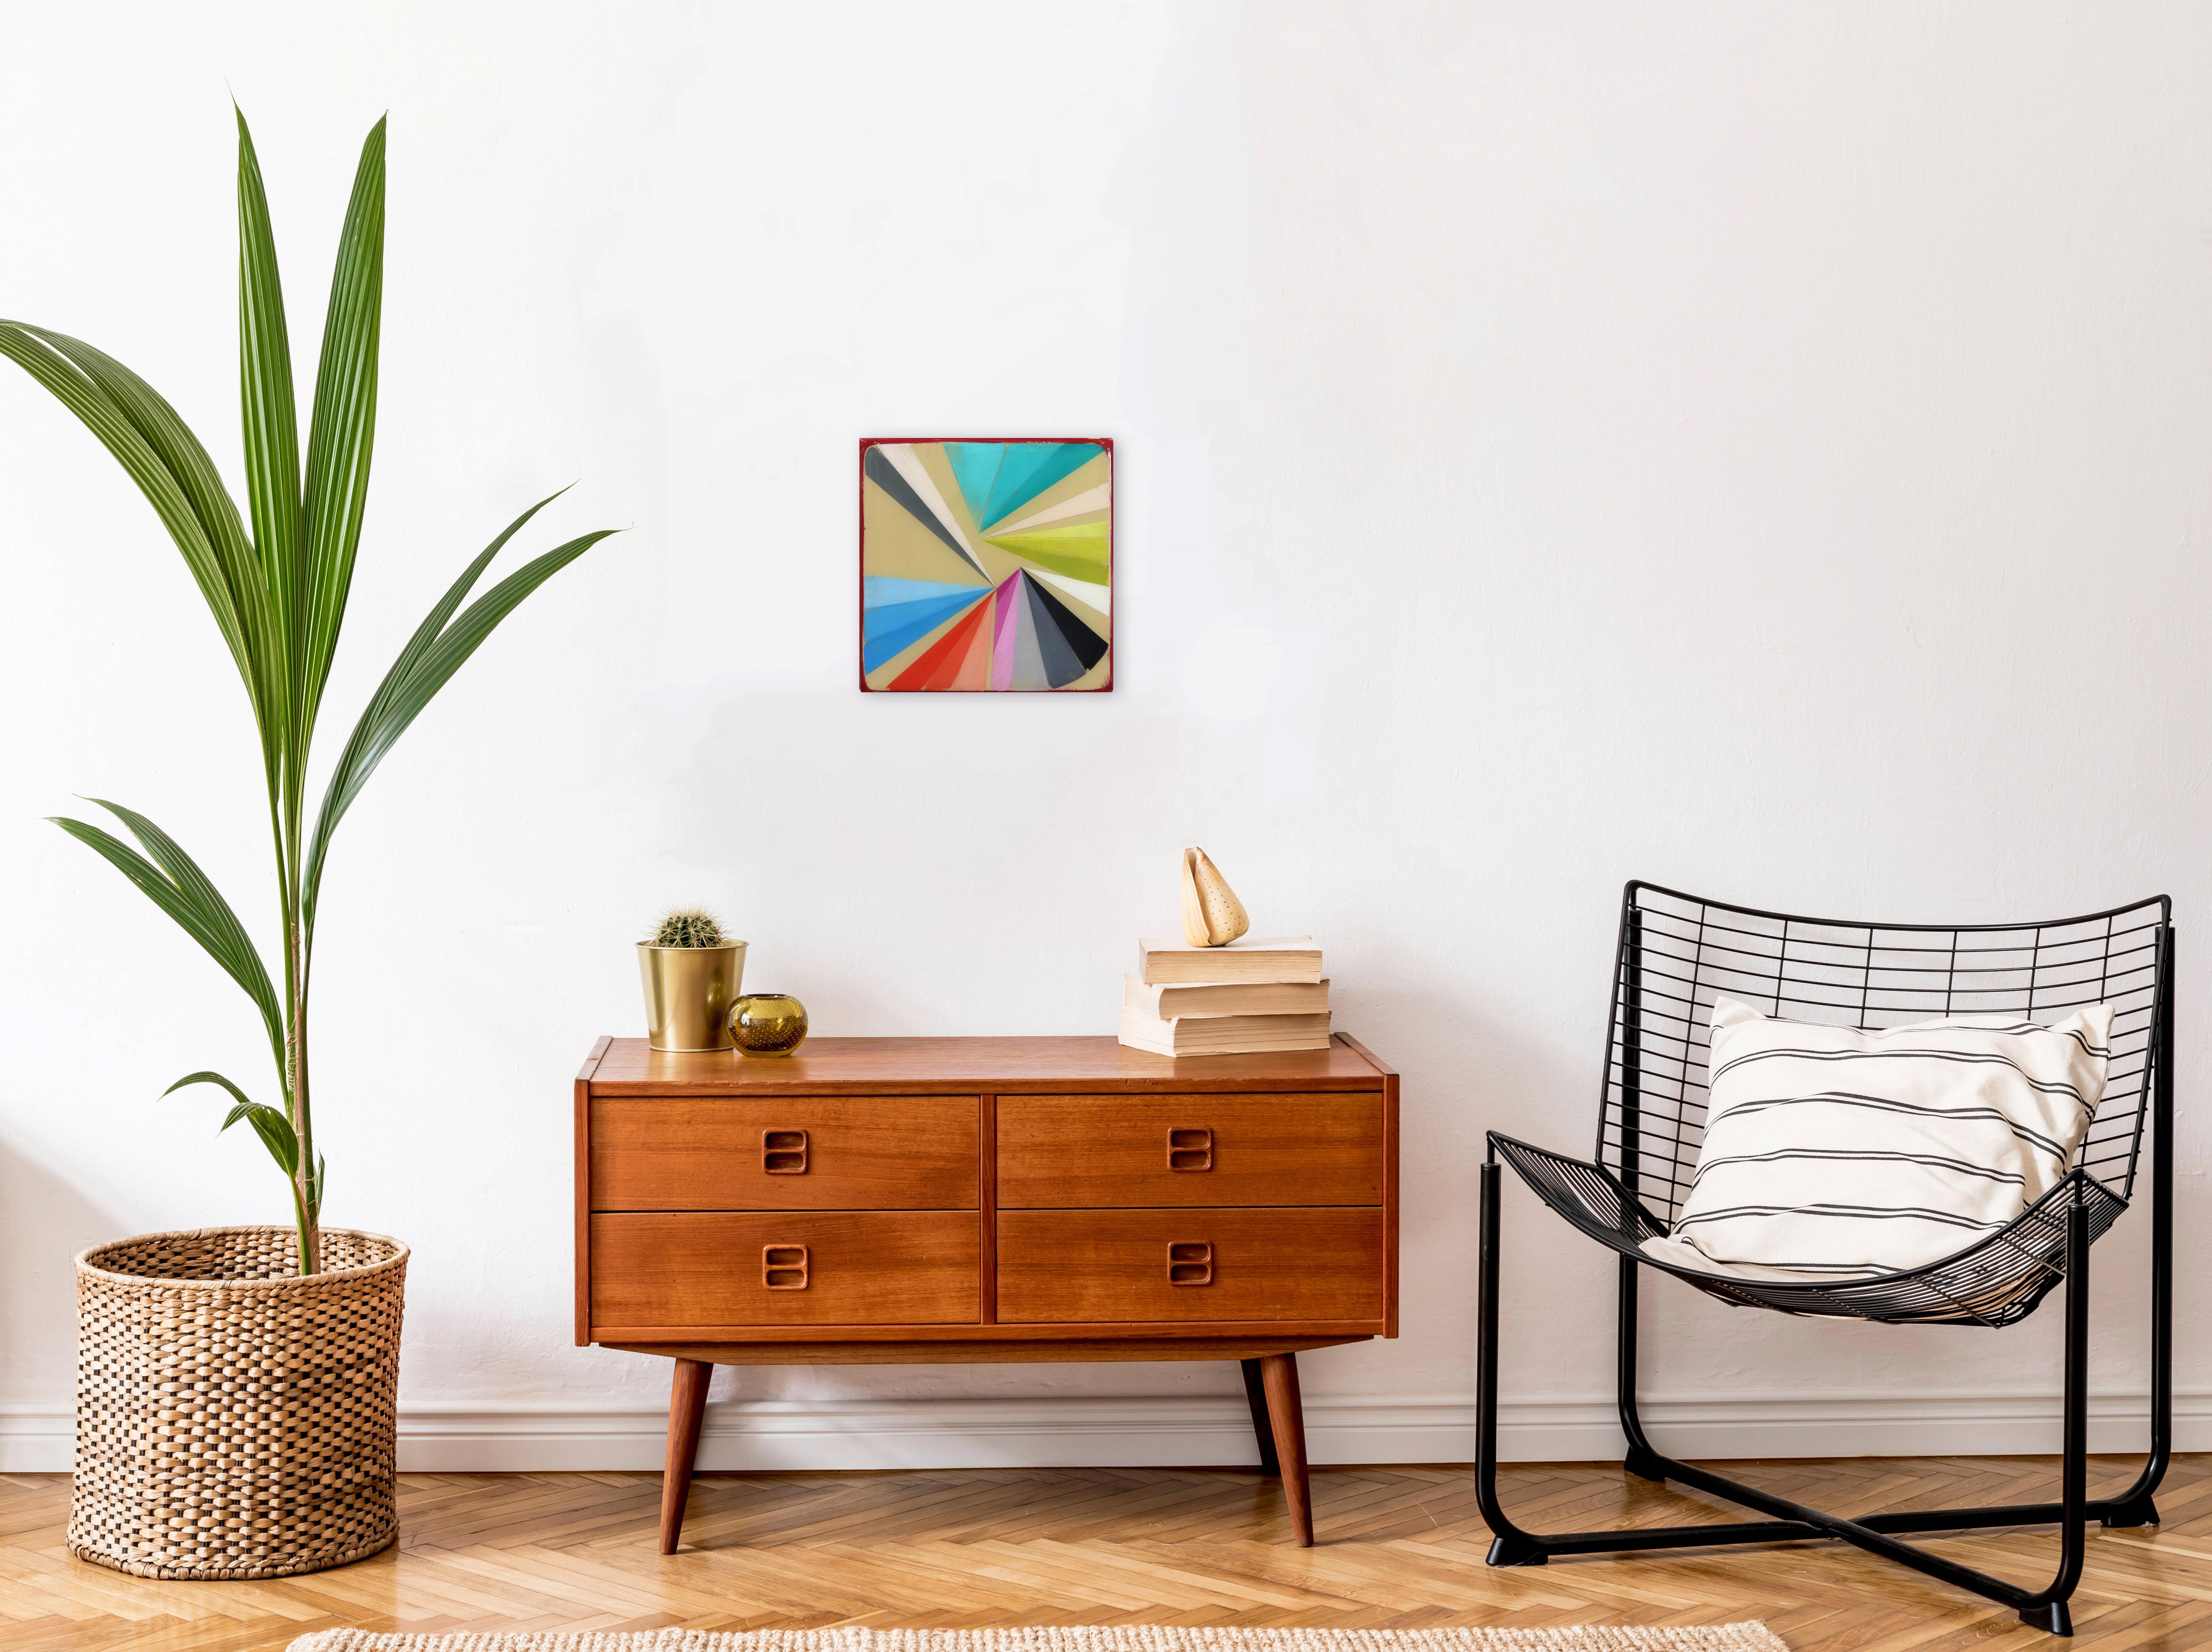 Wiggle Room 6 - Acrylic Multicolor Modern Minimalist Resin Artwork - Painting by Ricky Hunt